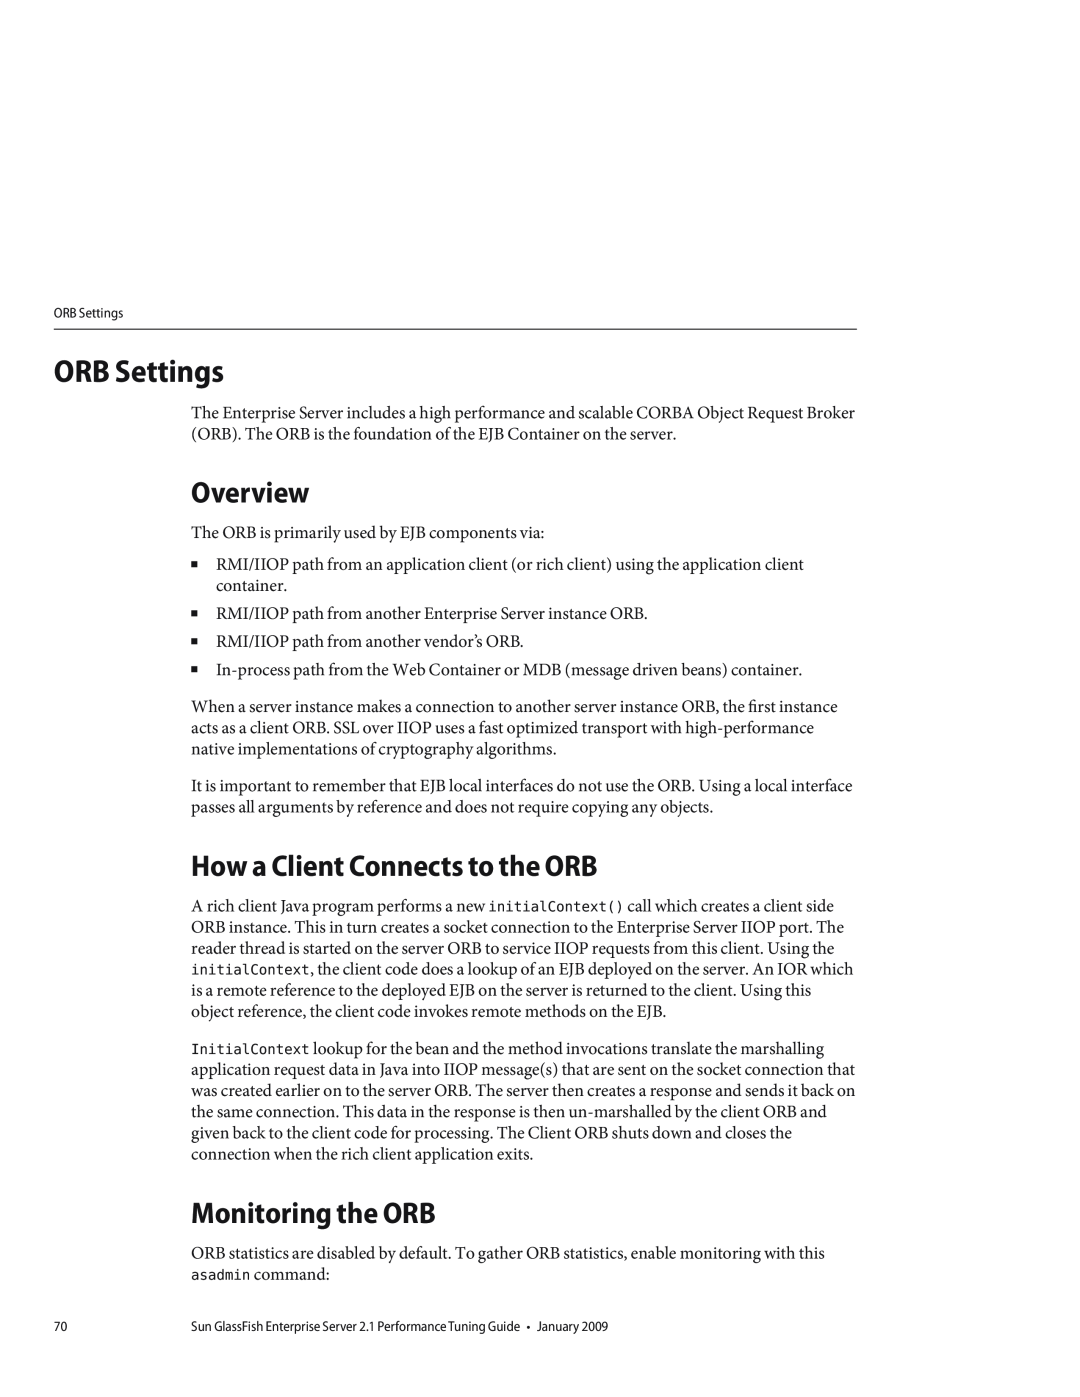 Sun Microsystems 820434310 manual ORB Settings, Overview, How a Client Connects to the ORB, Monitoring the ORB 